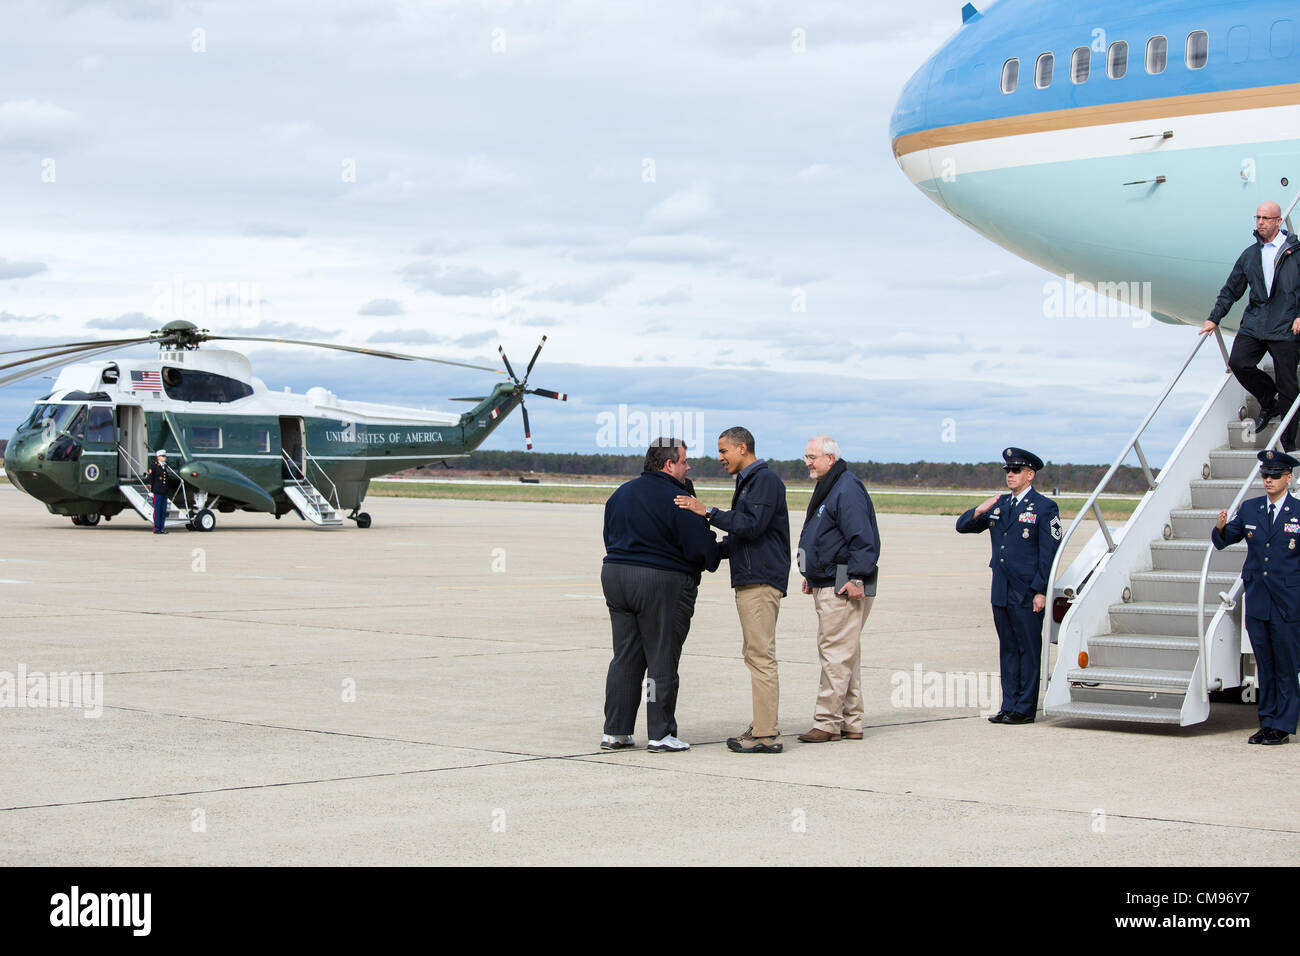 US President Barack Obama and FEMA Administrator Craig Fugate greet New Jersey Gov. Chris Christie on the tarmac of Atlantic City International Airport October 31, 2012 in Atlantic City, N.J. Obama is in New Jersey to view damage from Hurricane Sandy. Stock Photo